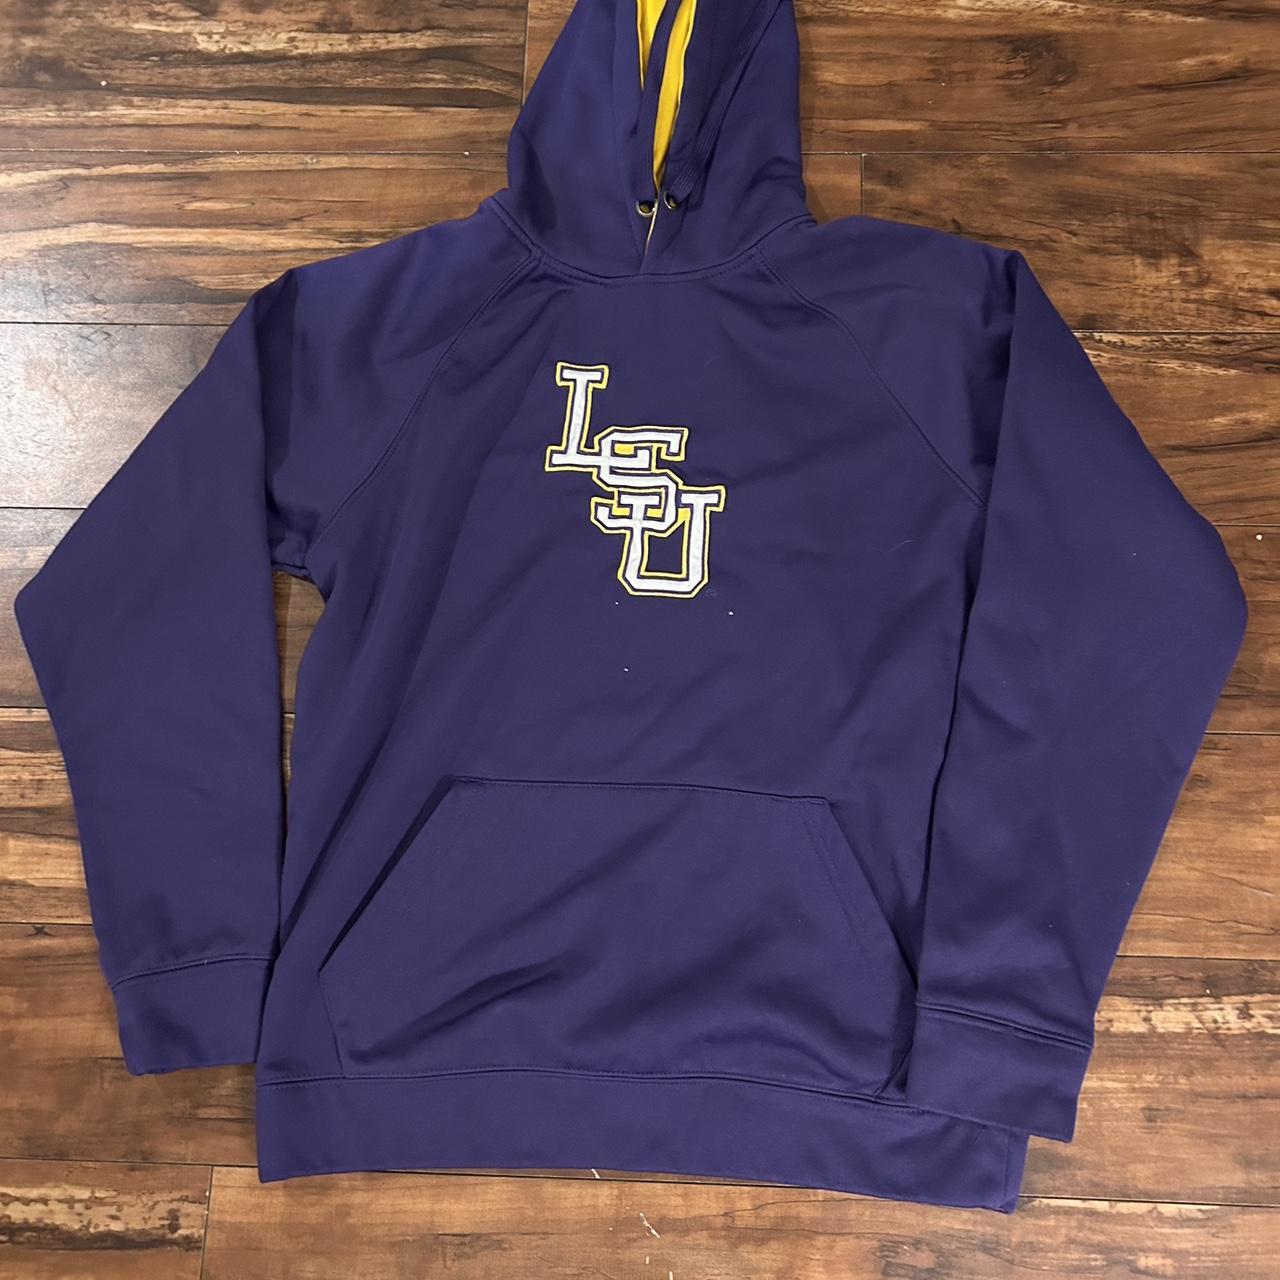 Lsu Hoodie no stains/holes dm for questions... - Depop